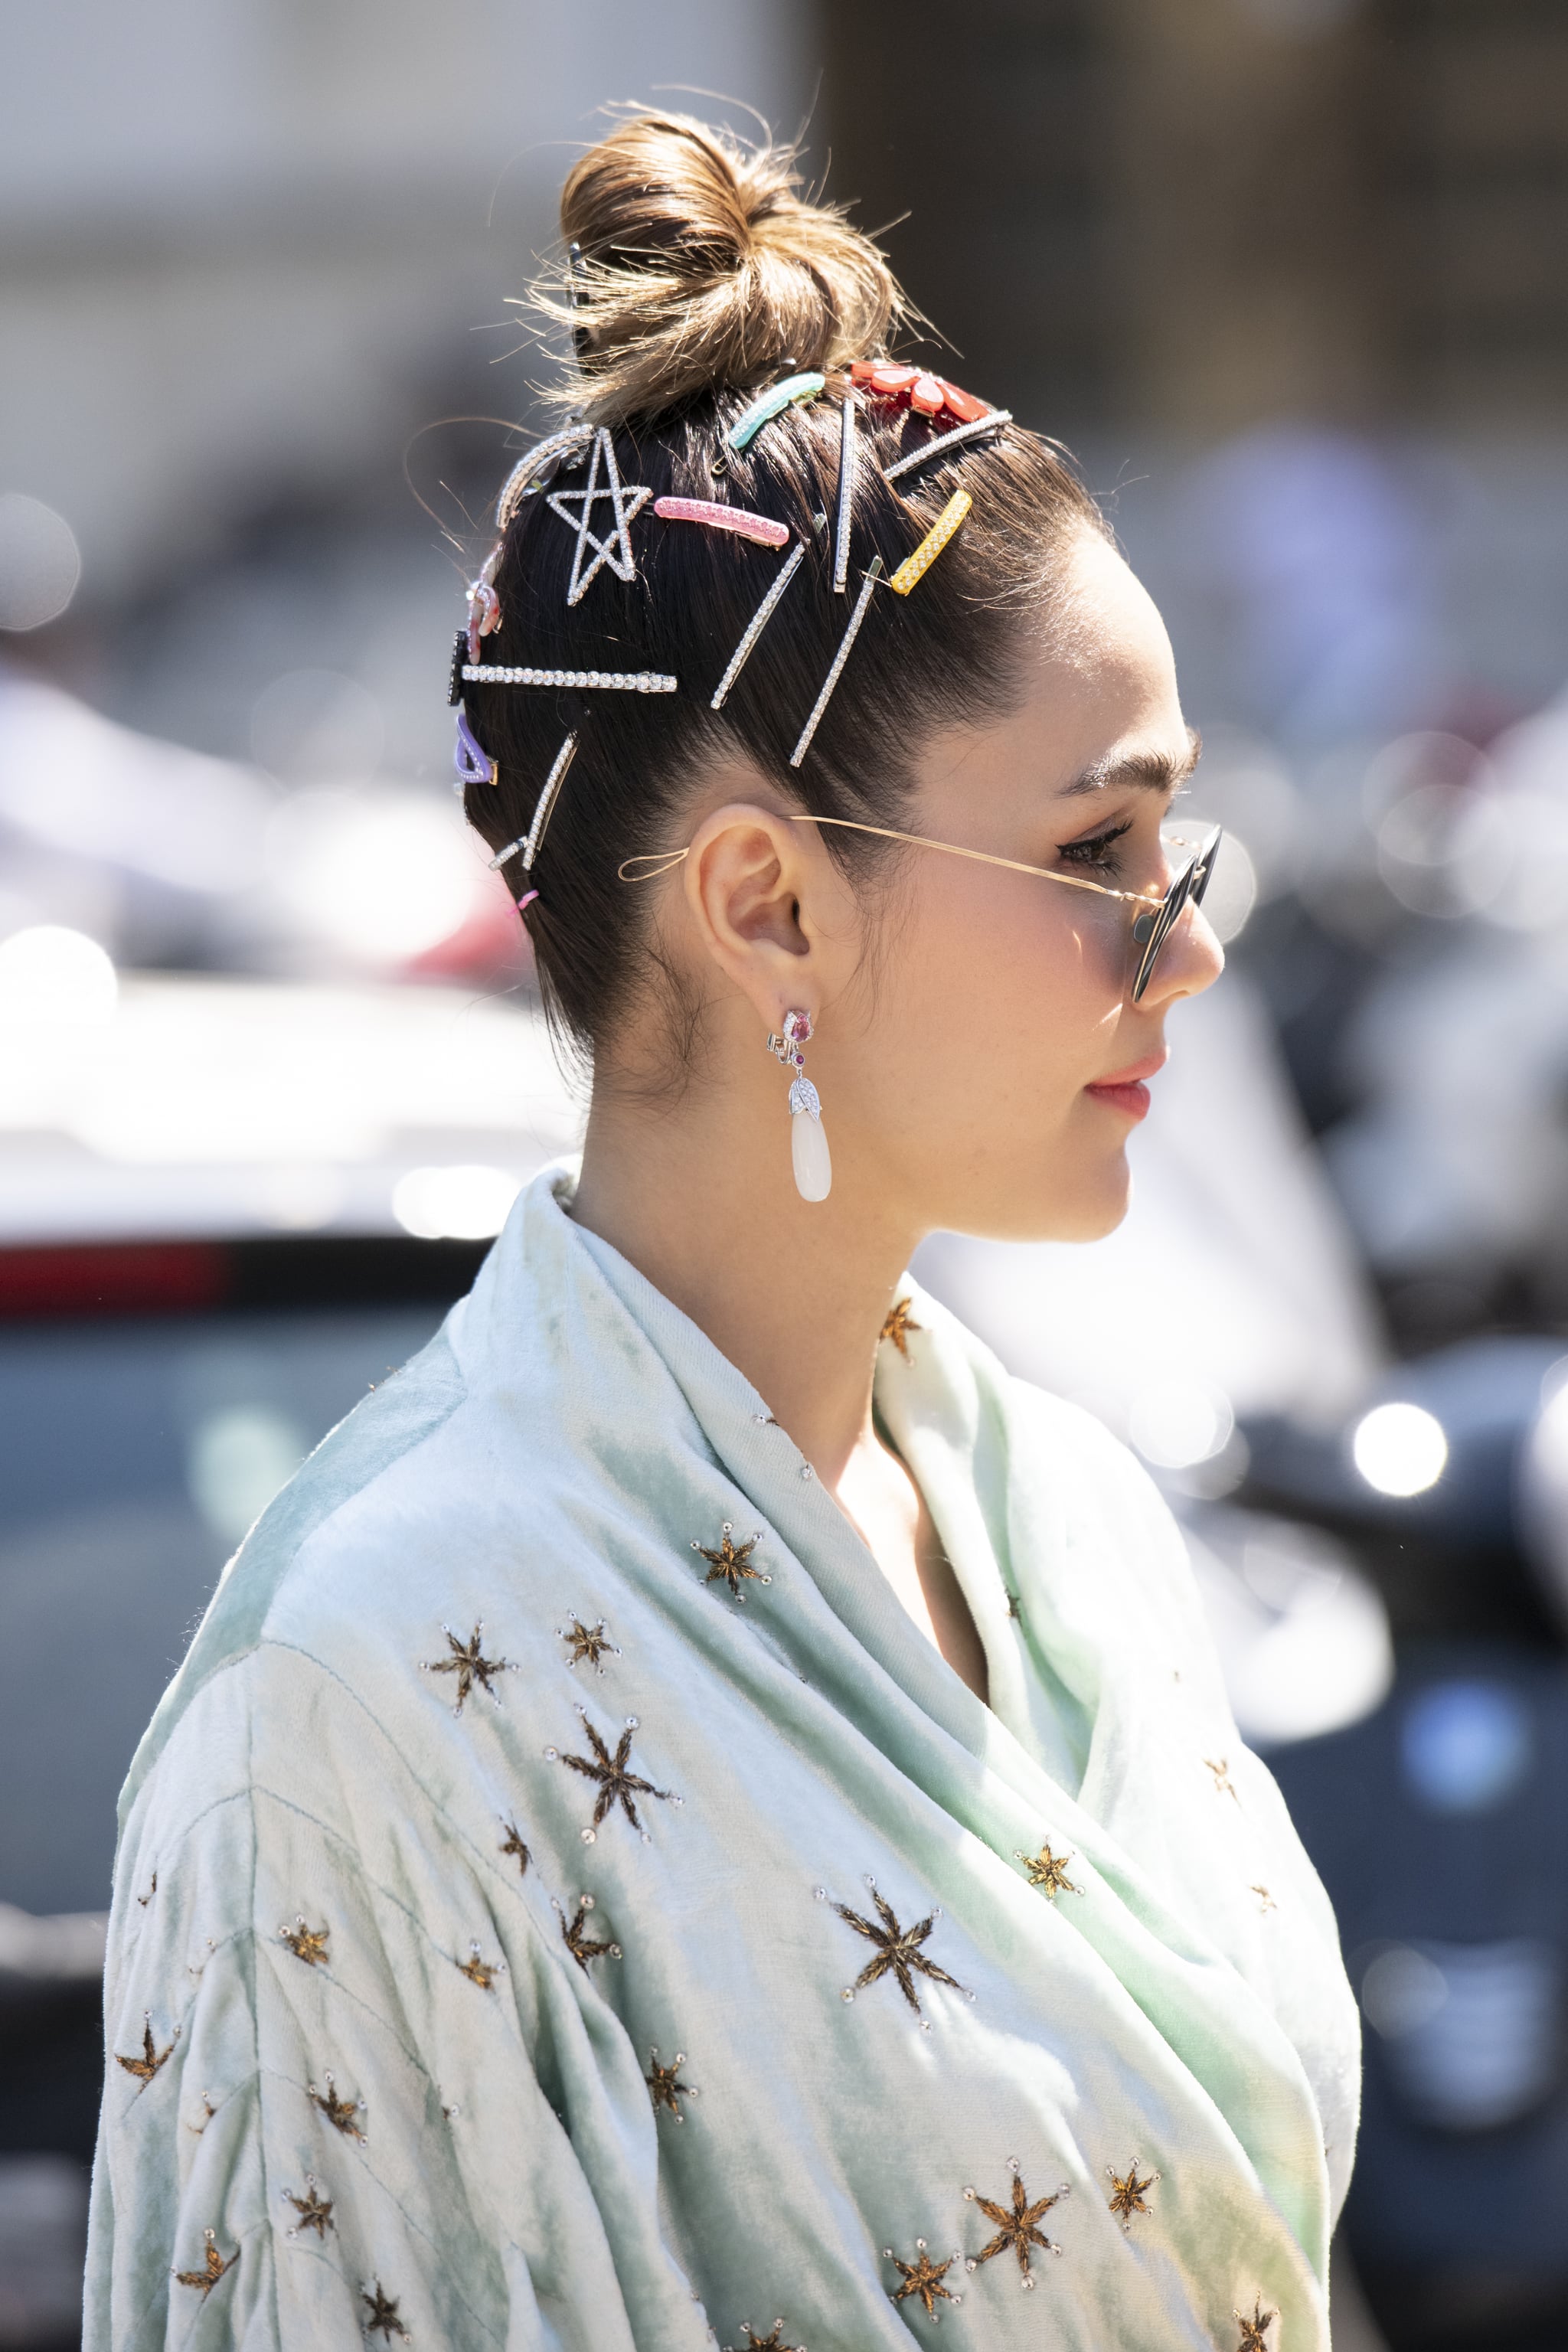 Pearl Hair Clips The Popular Hair Accessory Trend 2019